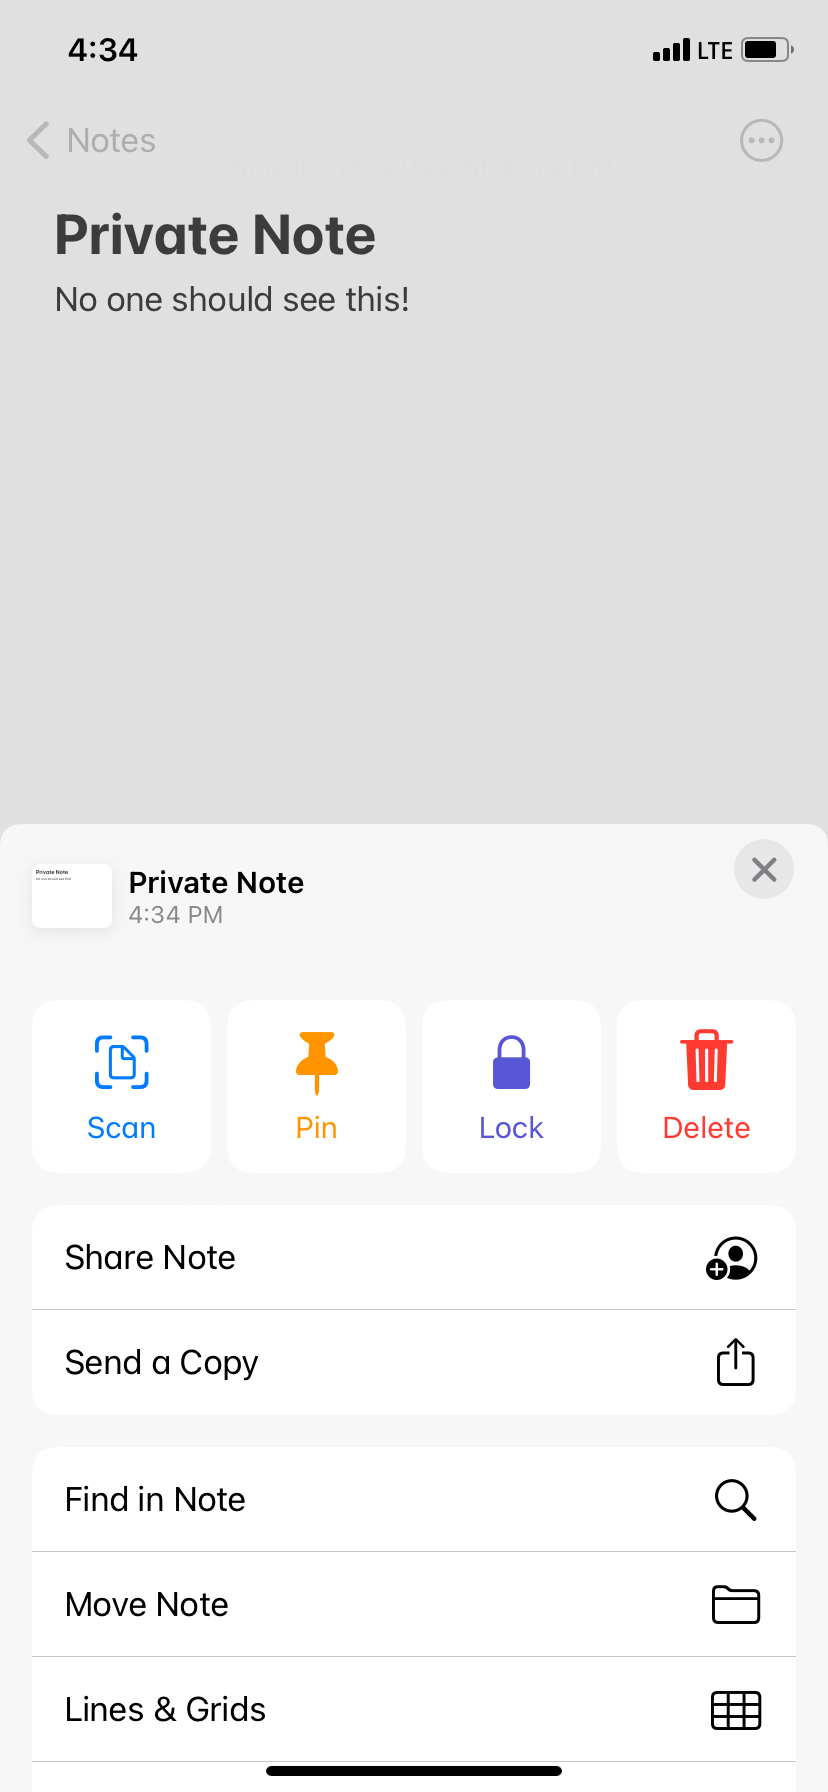 Image shows the Notes App options on an iPhone